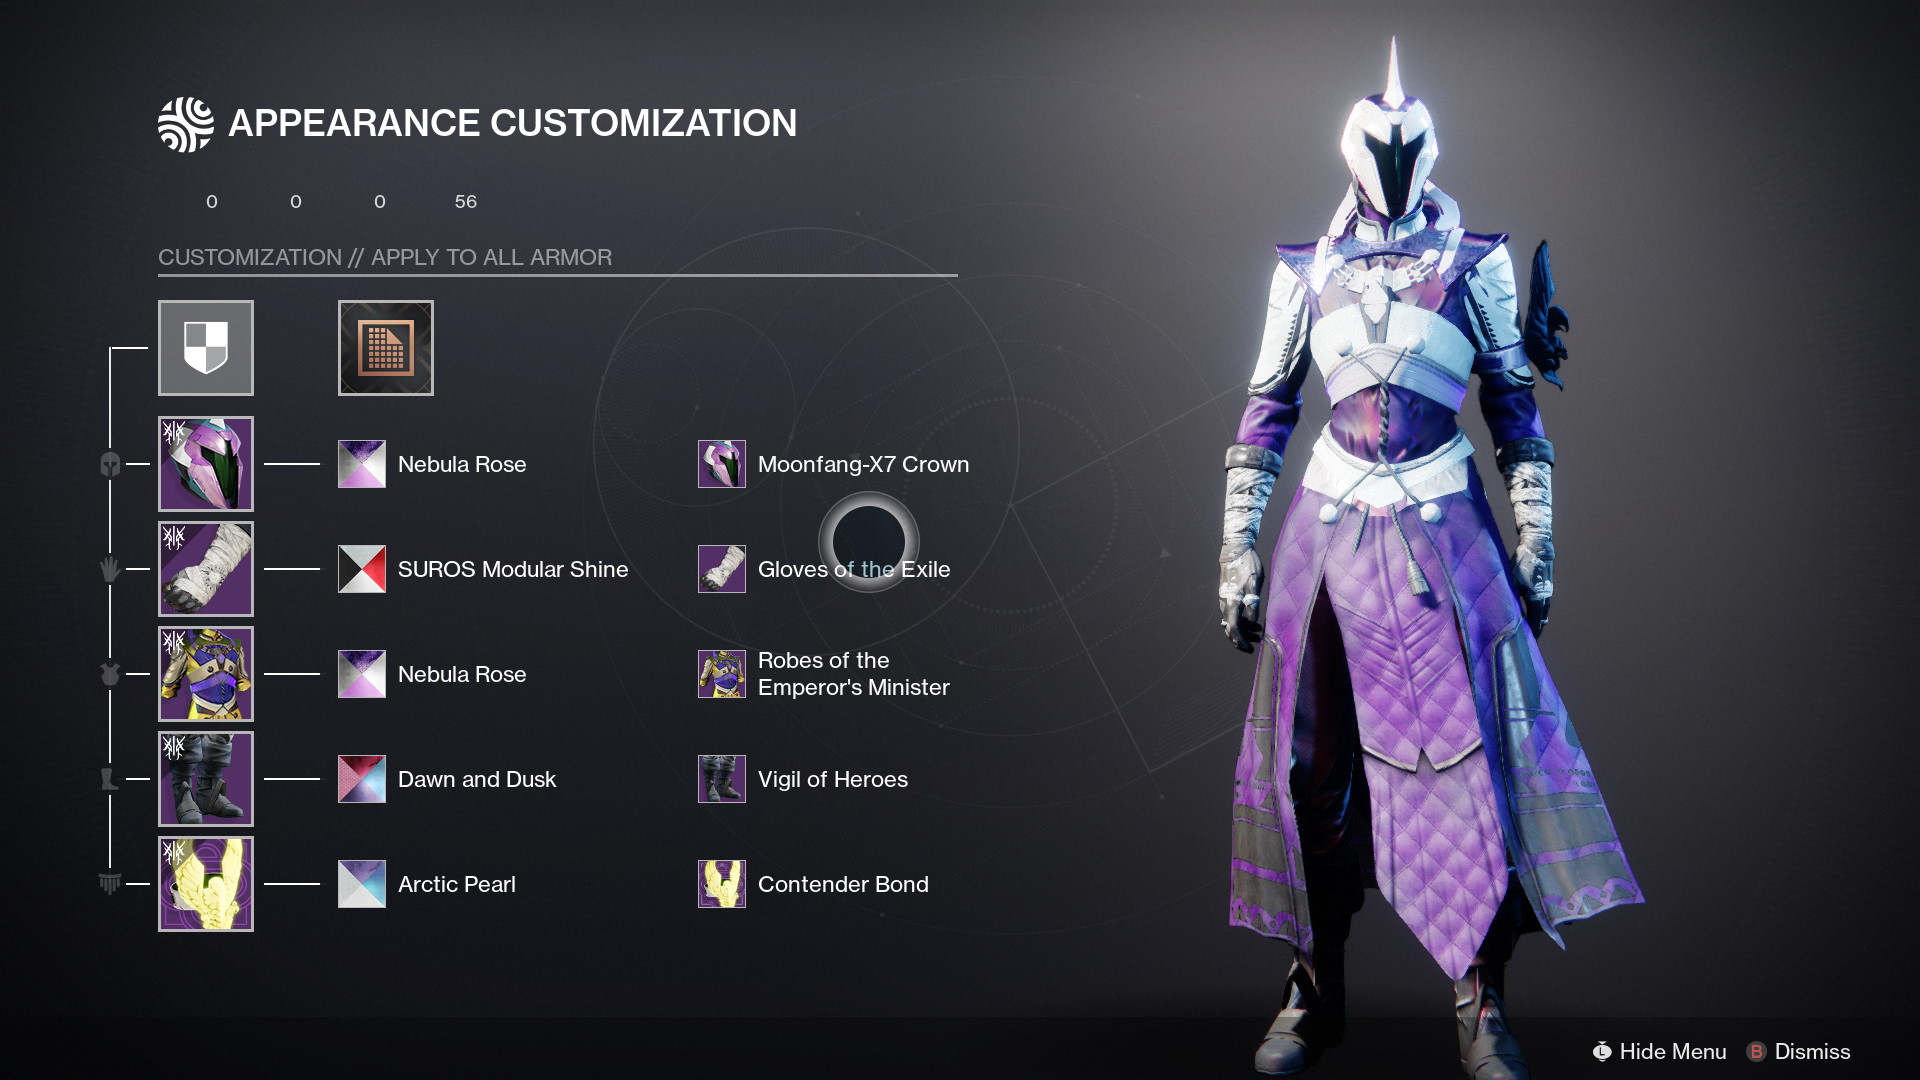 Destiny 2 s New Transmog System Is Incredibly Confusing And Involves Grinding Bounties For Some